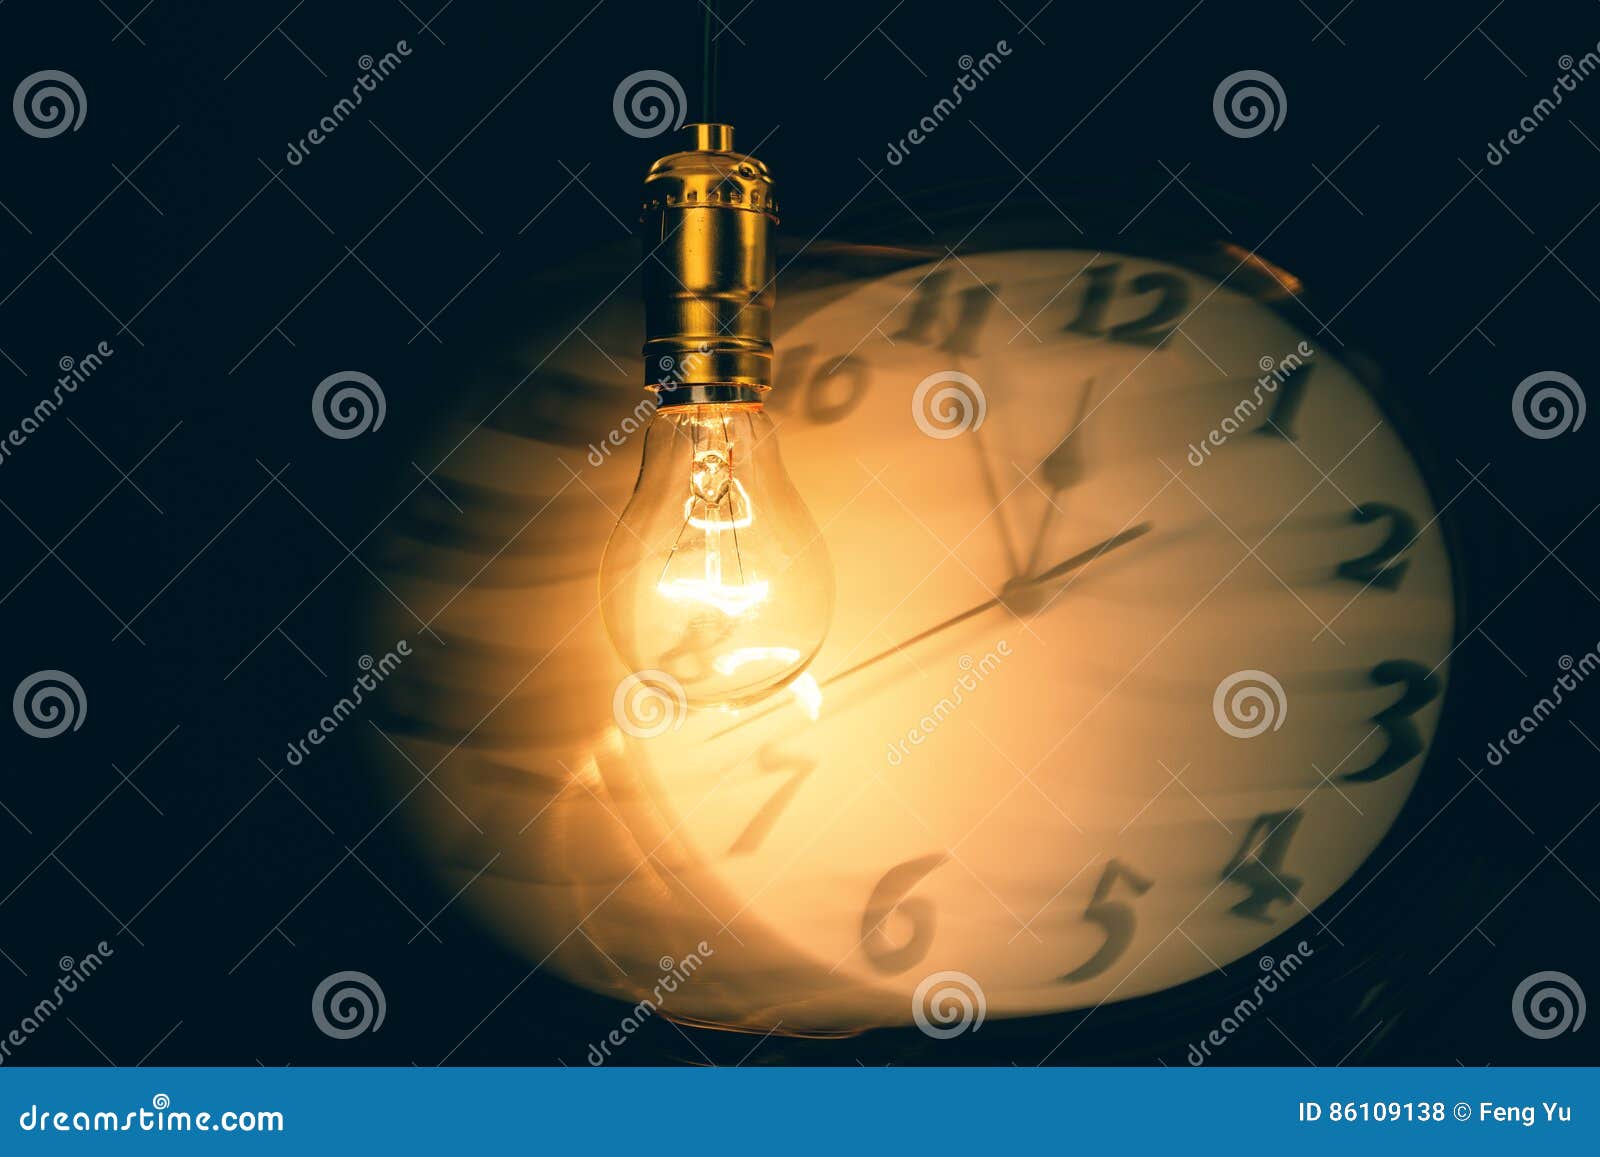 Light bulb and clock stock photo. Image of glowing, bulb - 86109138